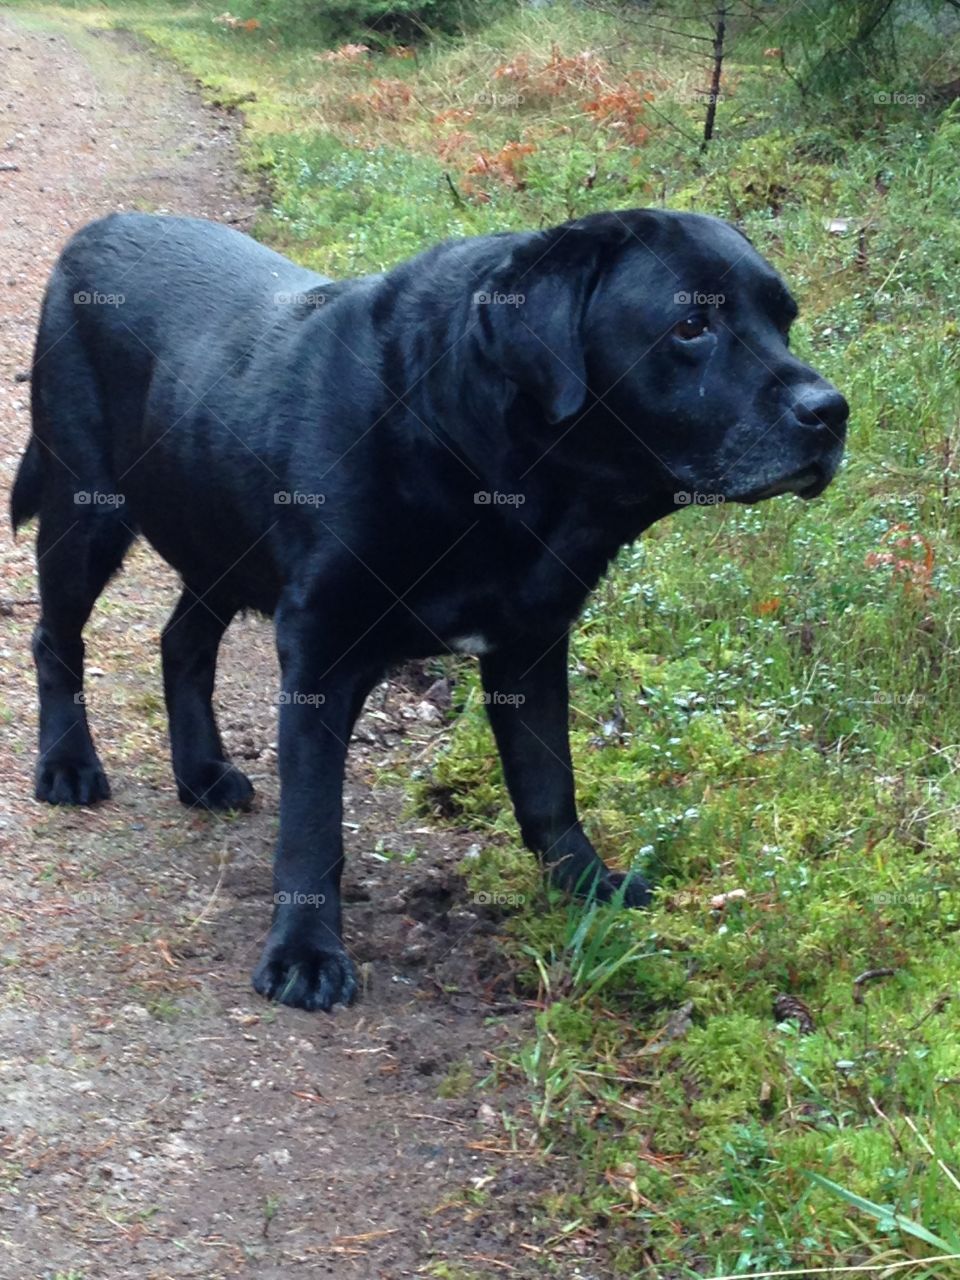 Dog in the forest. My beloved dog
30/01/2004 - 30/07/2015
You will be missed forever <3